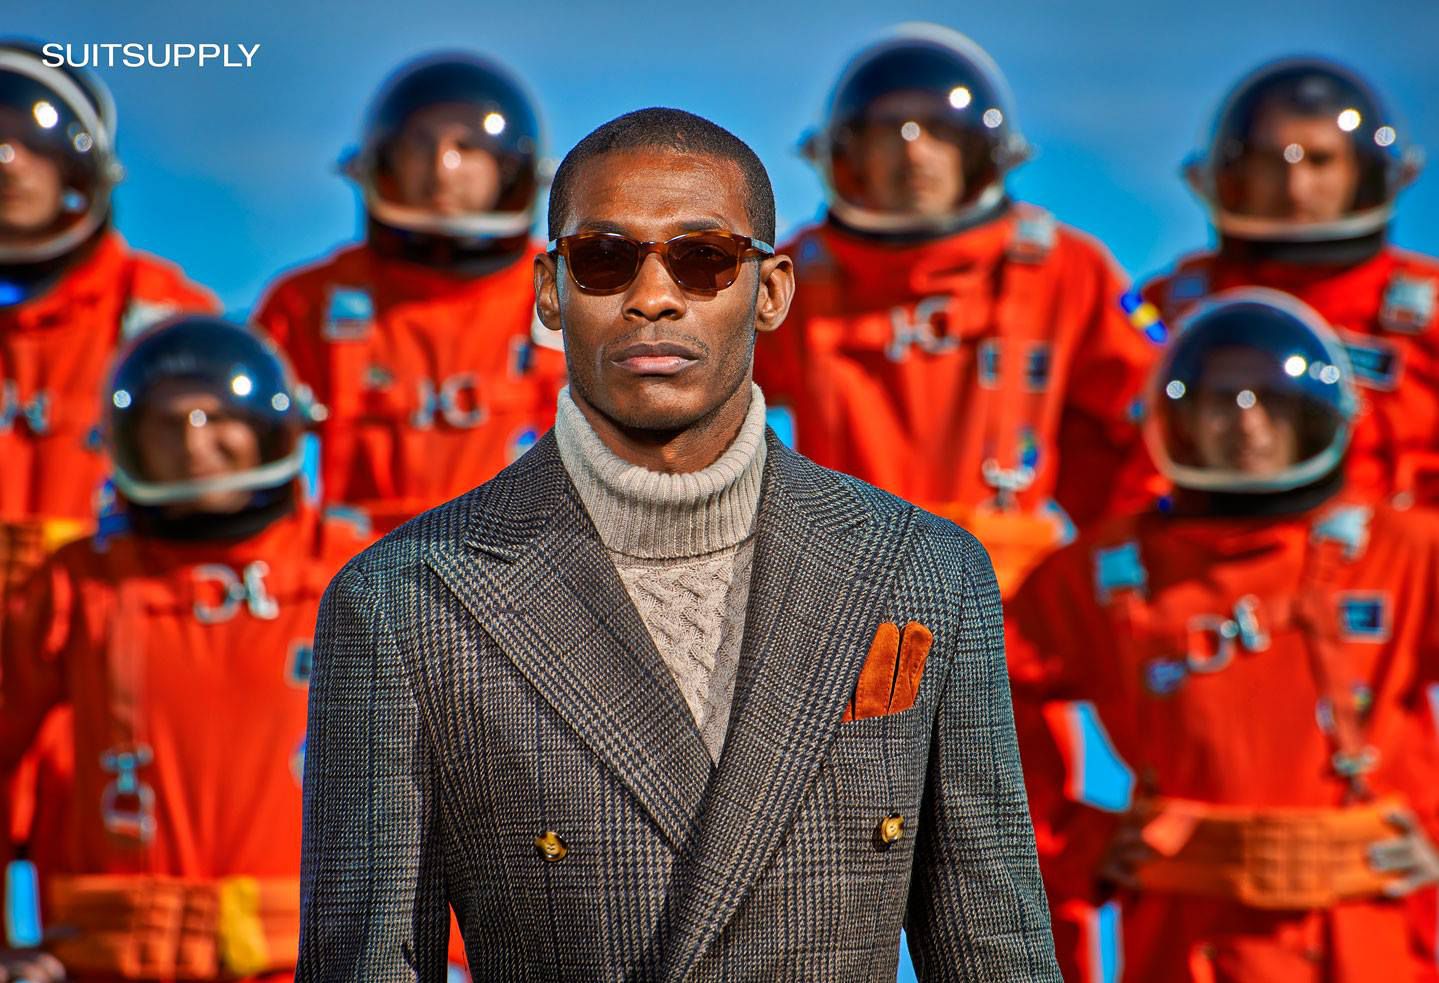 Suitsupply Collection Fall/Winter 2014